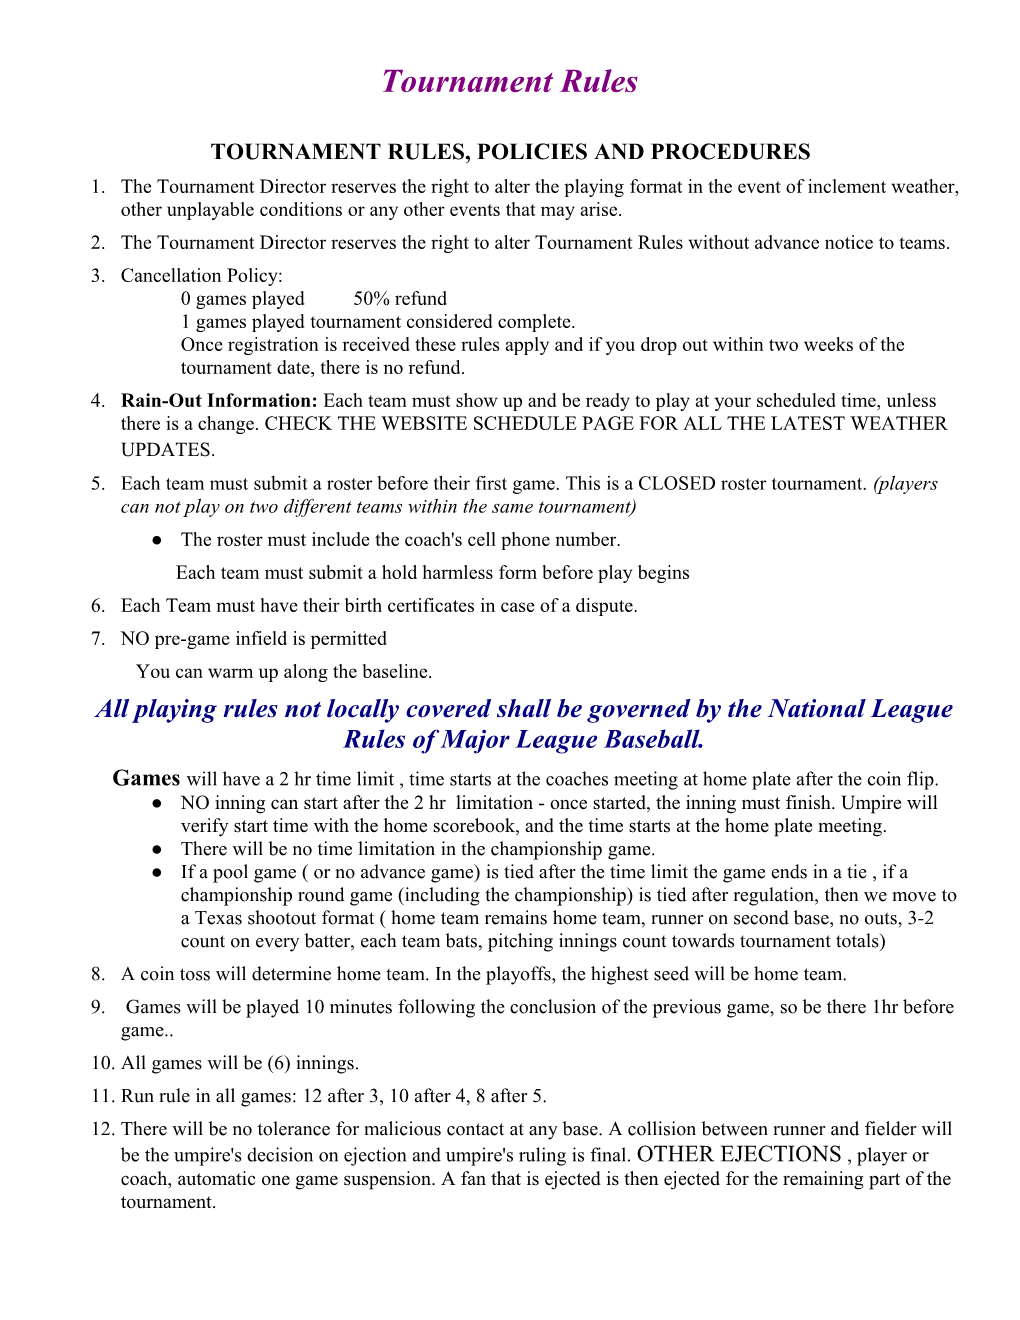 Tournament Rules, Policies and Procedures